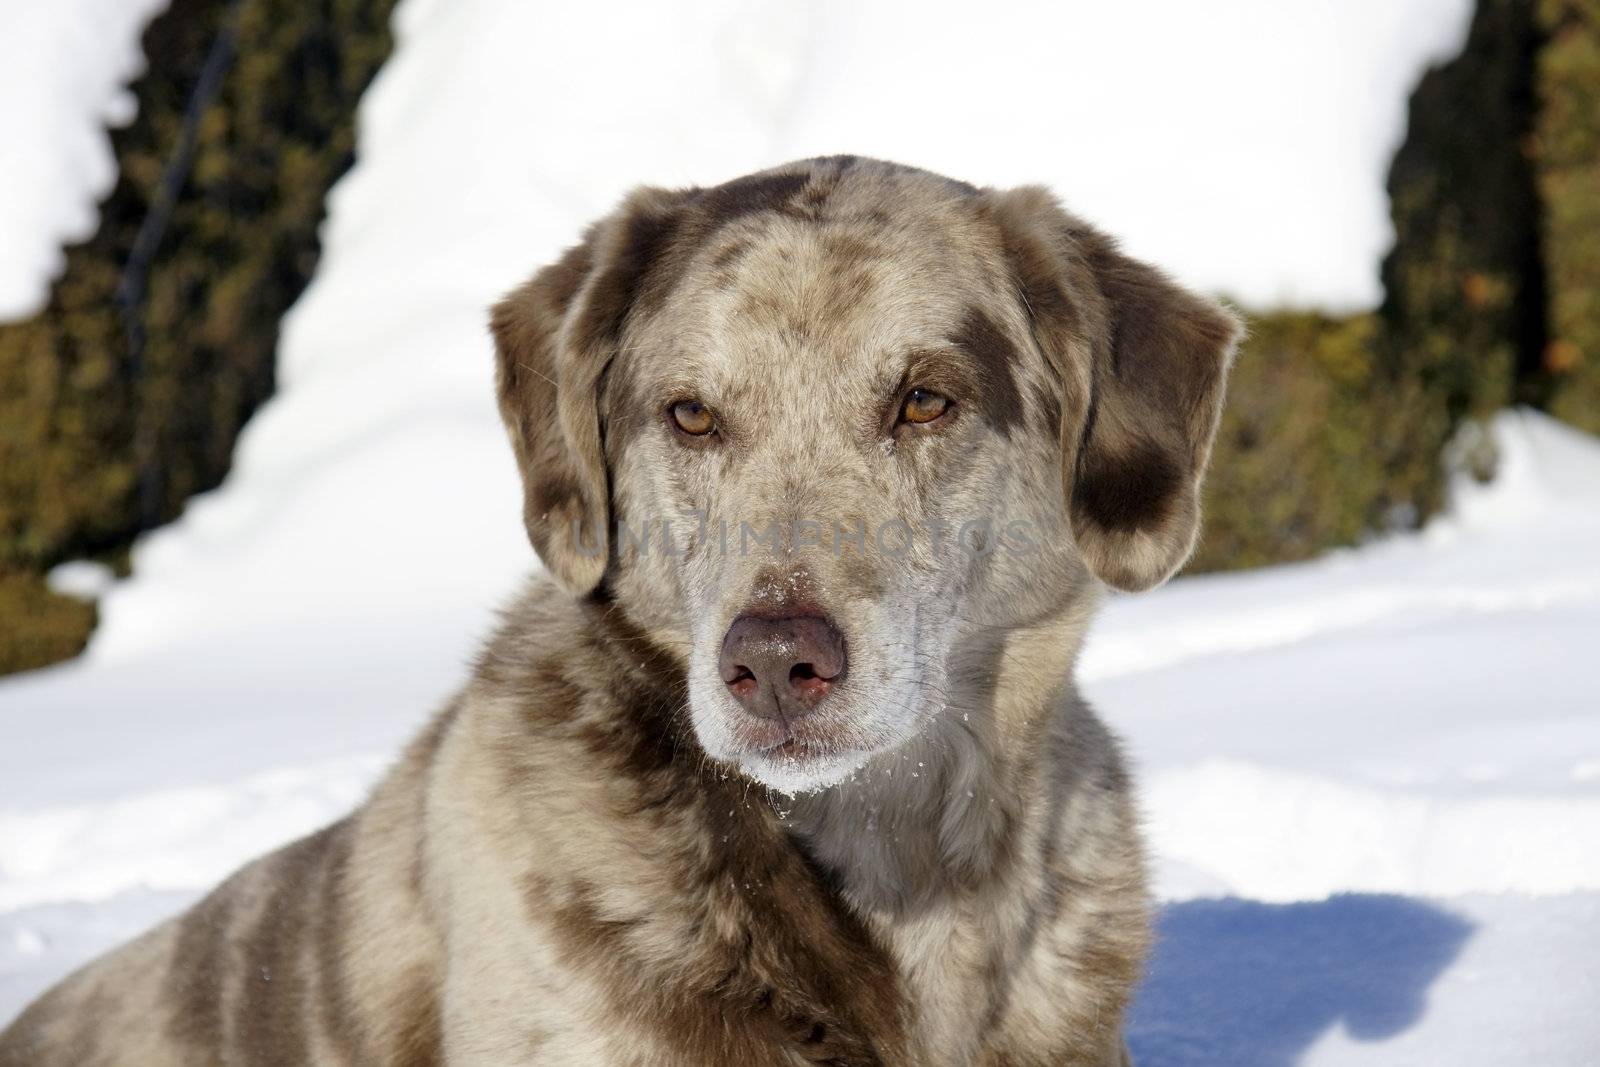 Beautiful spotted mix dog sitting in the snow, great details on face with snowflakes and ice on whiskers.